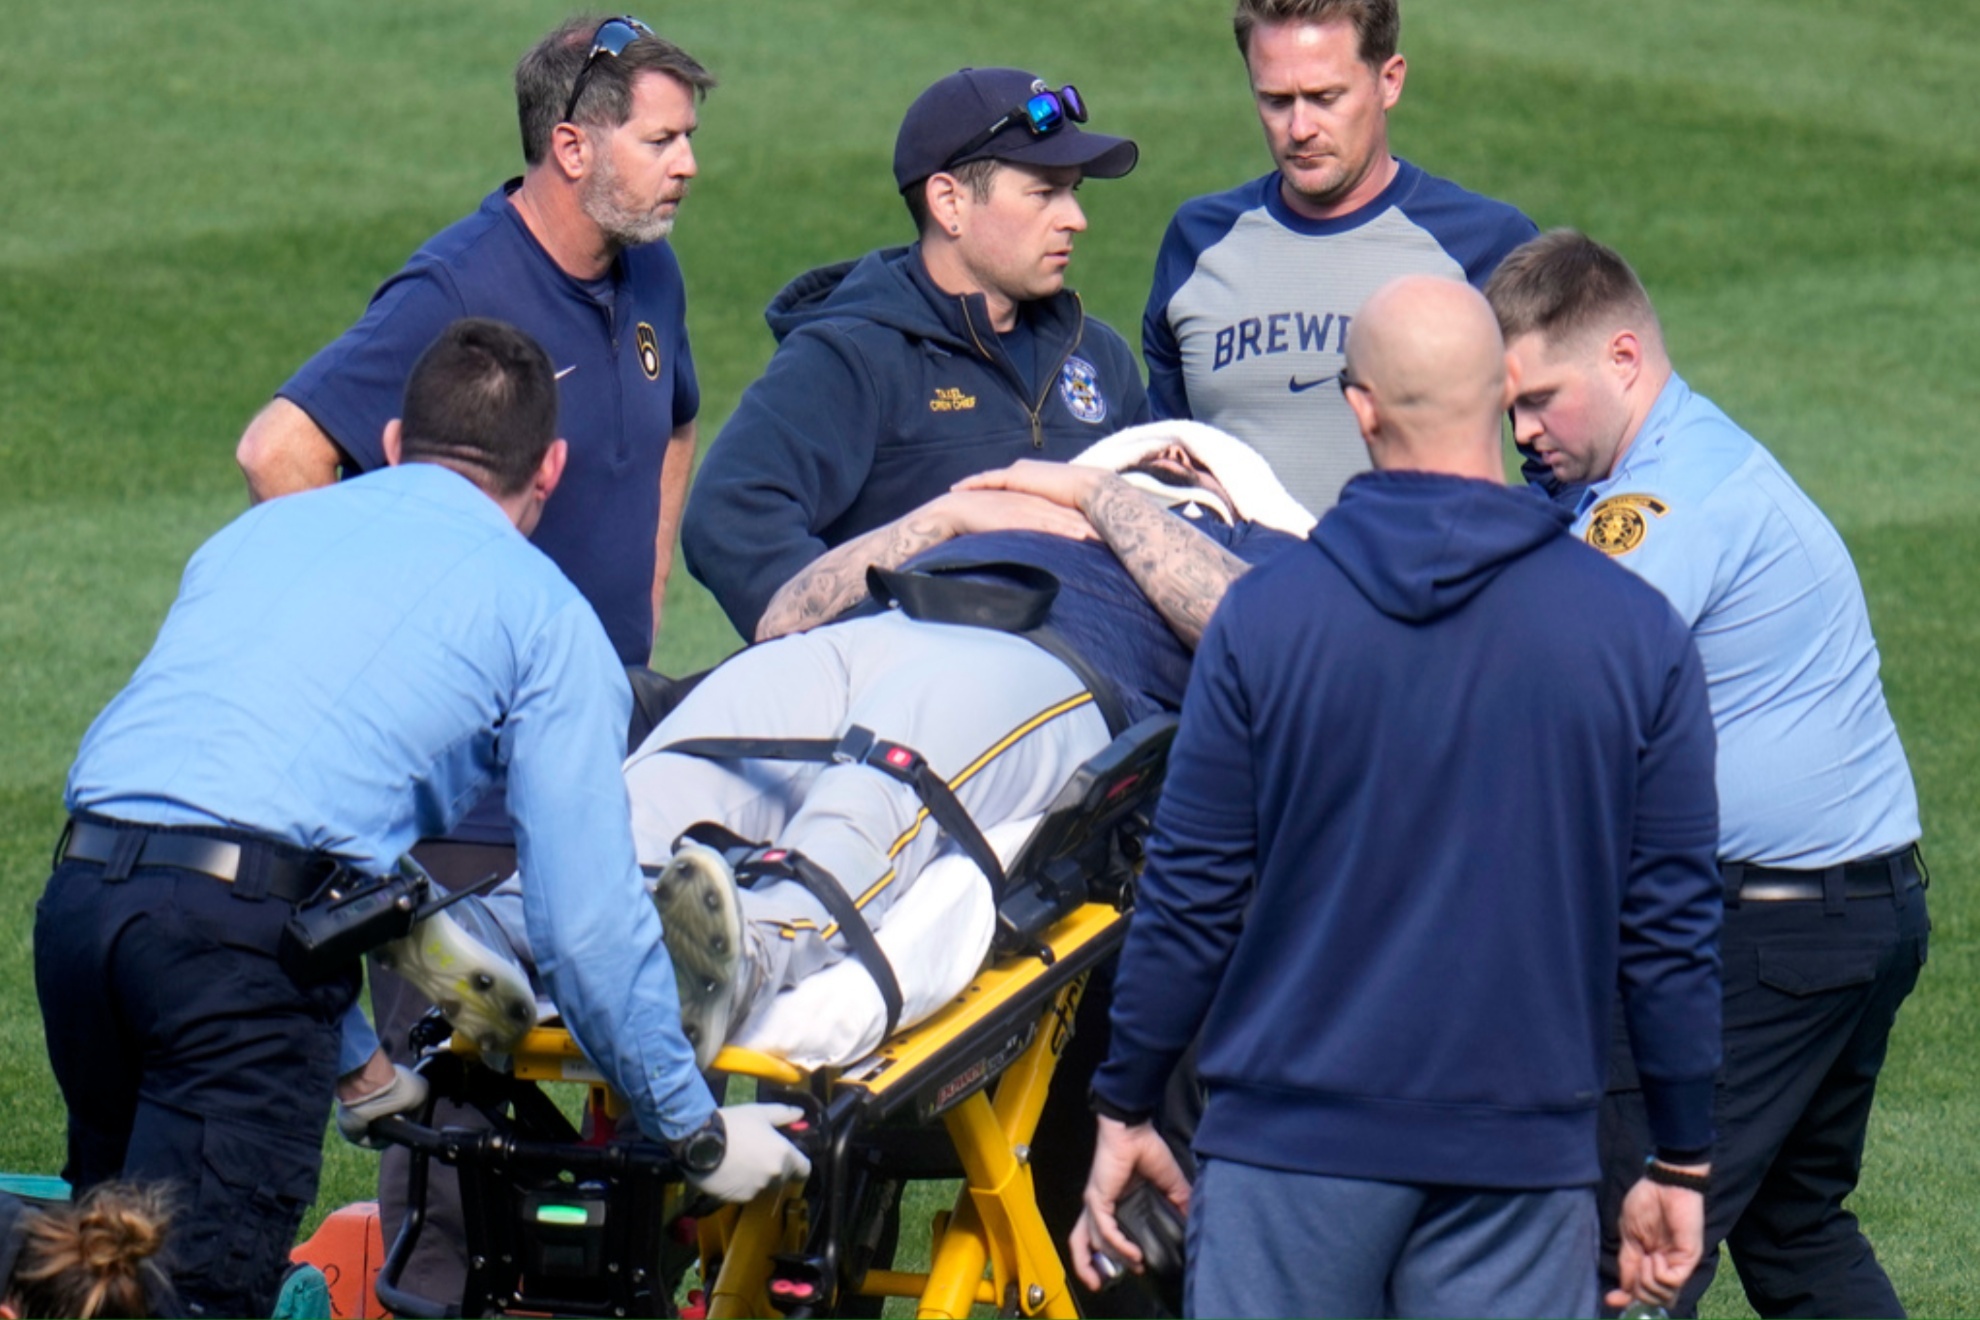 The Brewers pitcher was taken to a local hospital after being hit by a pitch on Monday